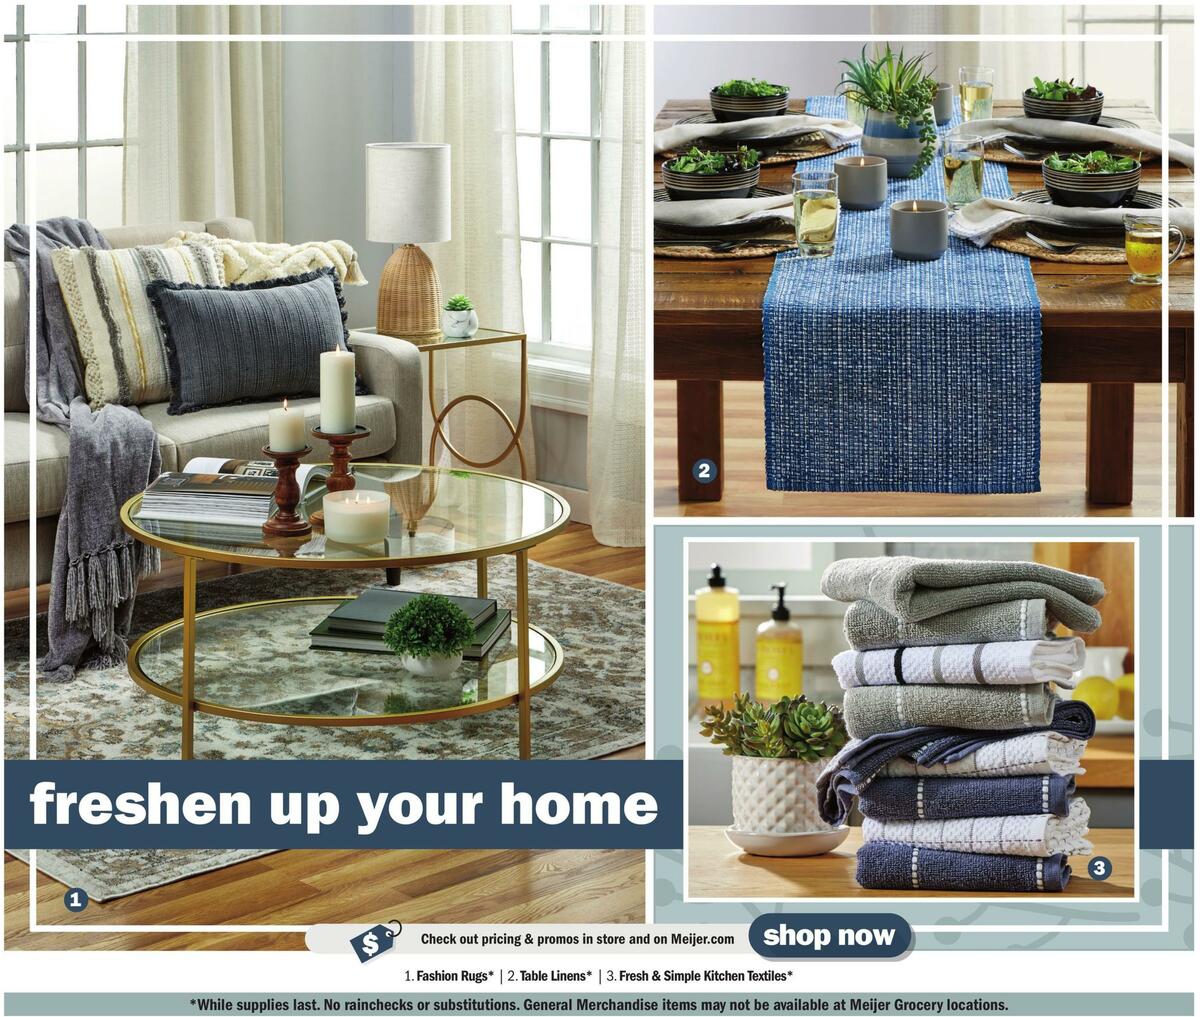 Meijer Home Weekly Ad from January 1